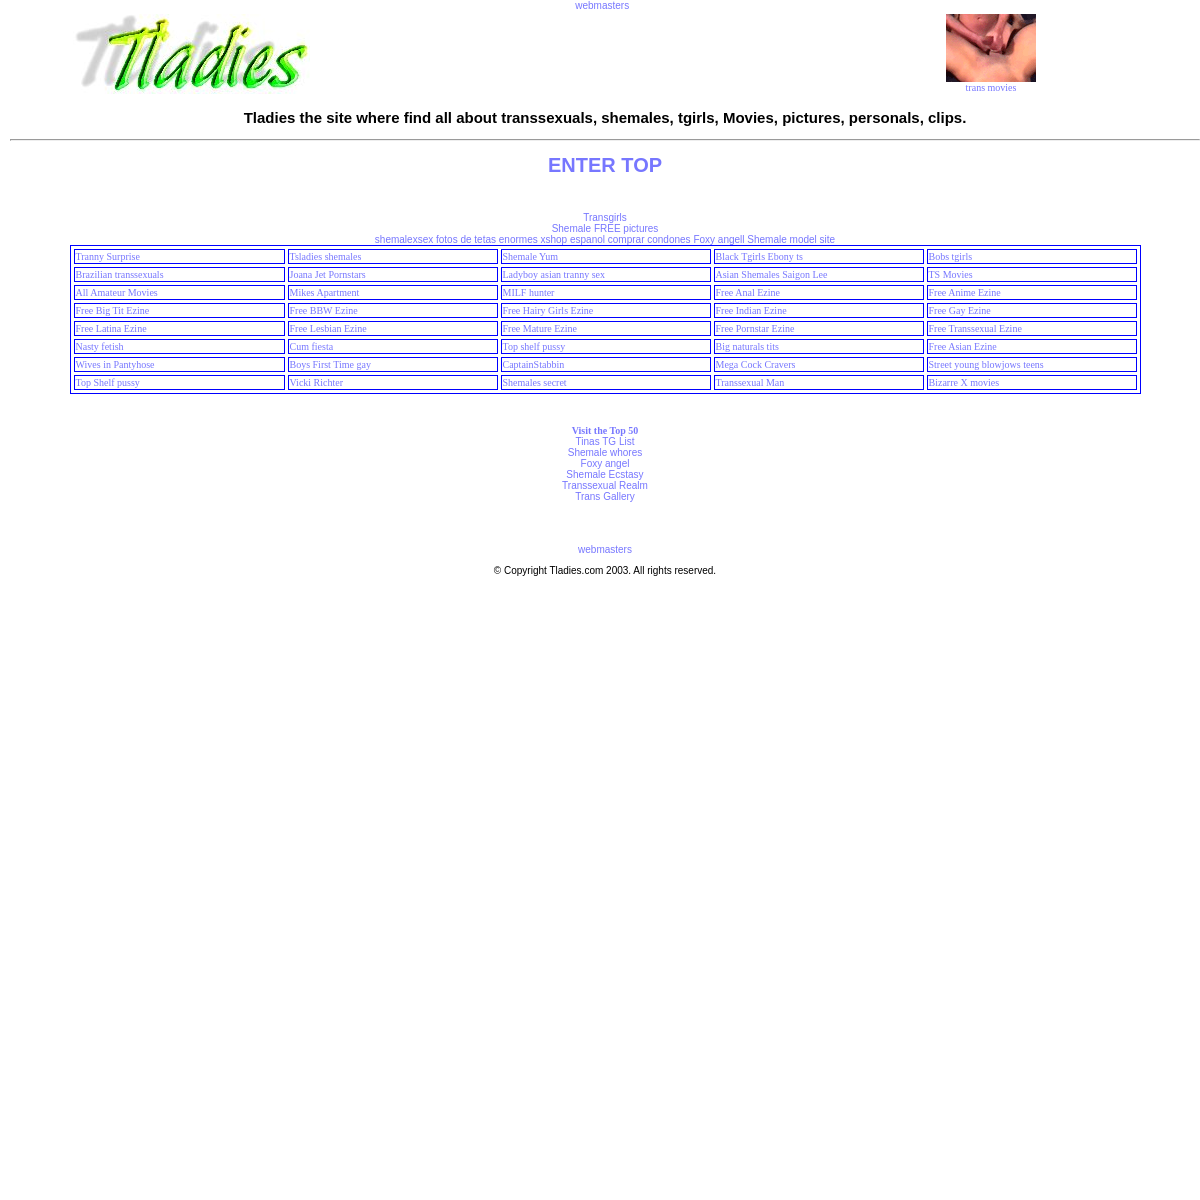 A complete backup of tladies.com